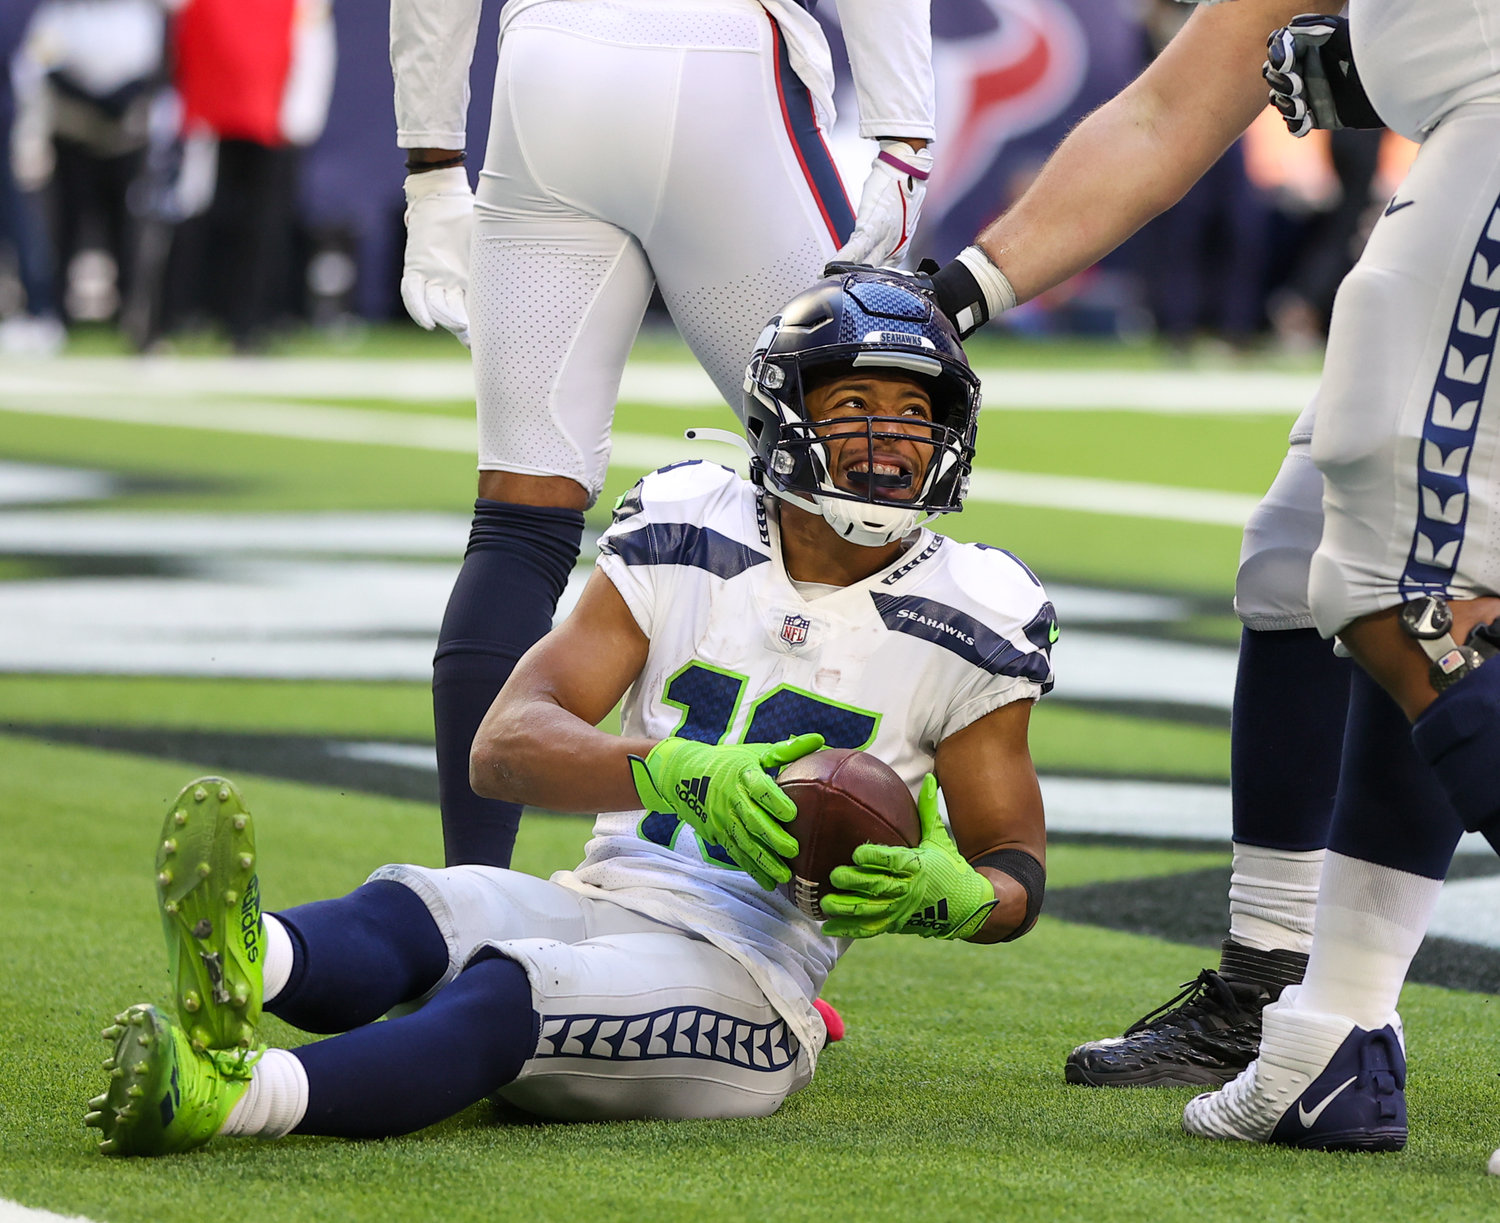 Seattle Seahawks wide receiver Tyler Lockett (16) reacts after catching a pass for a successful two-point conversion during the second half of an NFL game between the Seahawks and the Texans on December 12, 2021 in Houston, Texas.